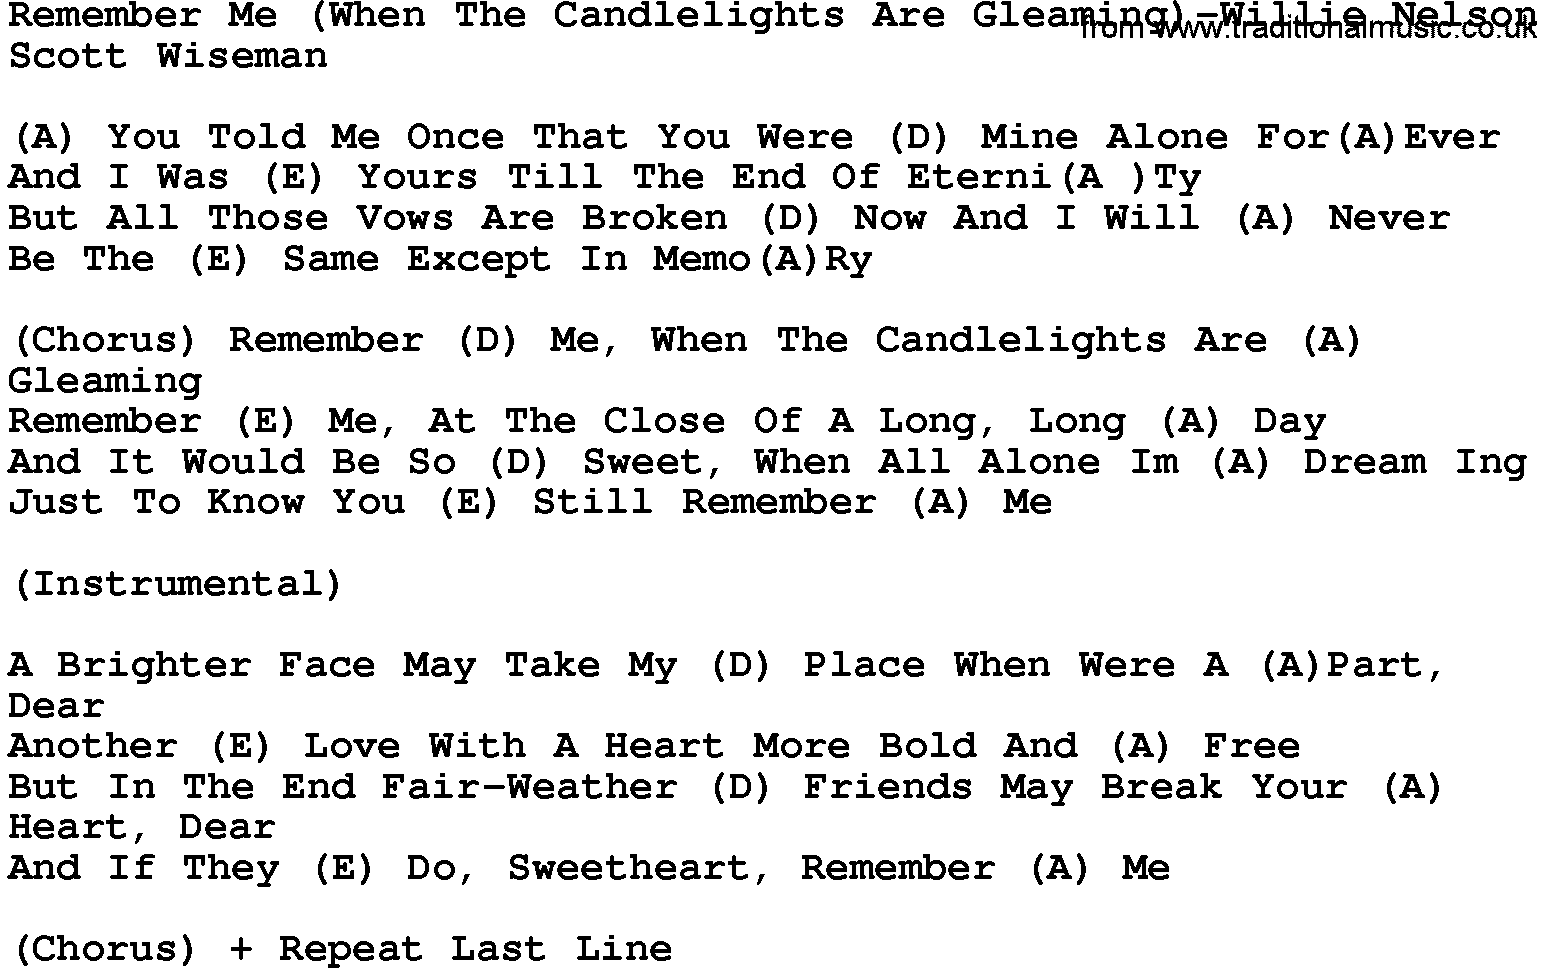 Country music song: Remember Me(When The Candlelights Are Gleaming)-Willie Nels lyrics and chords